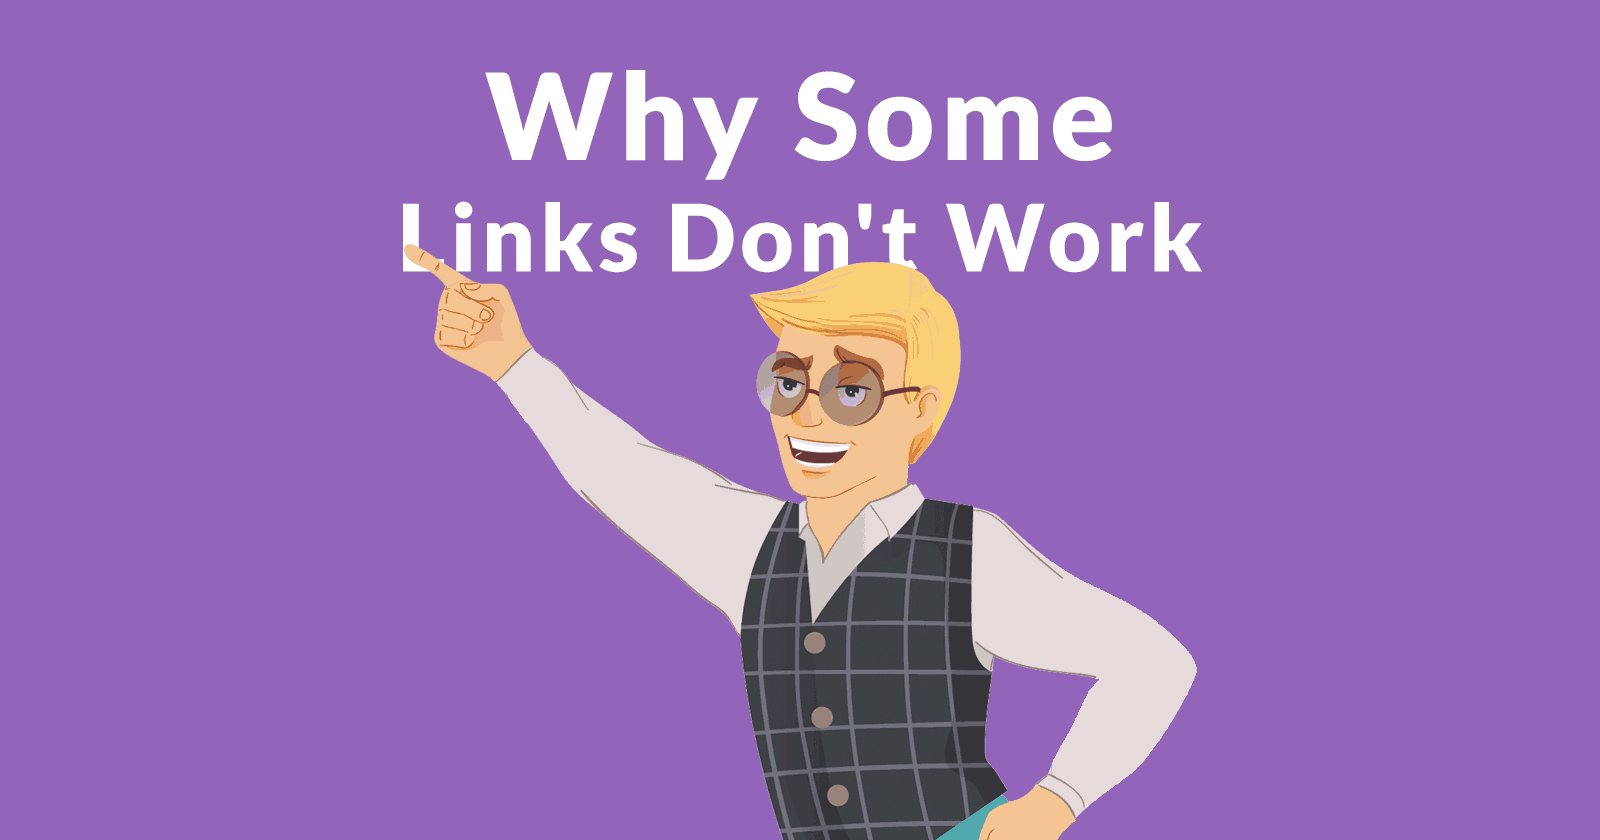 Image of an unfashionable man with text that says Why Some Links Don't Work